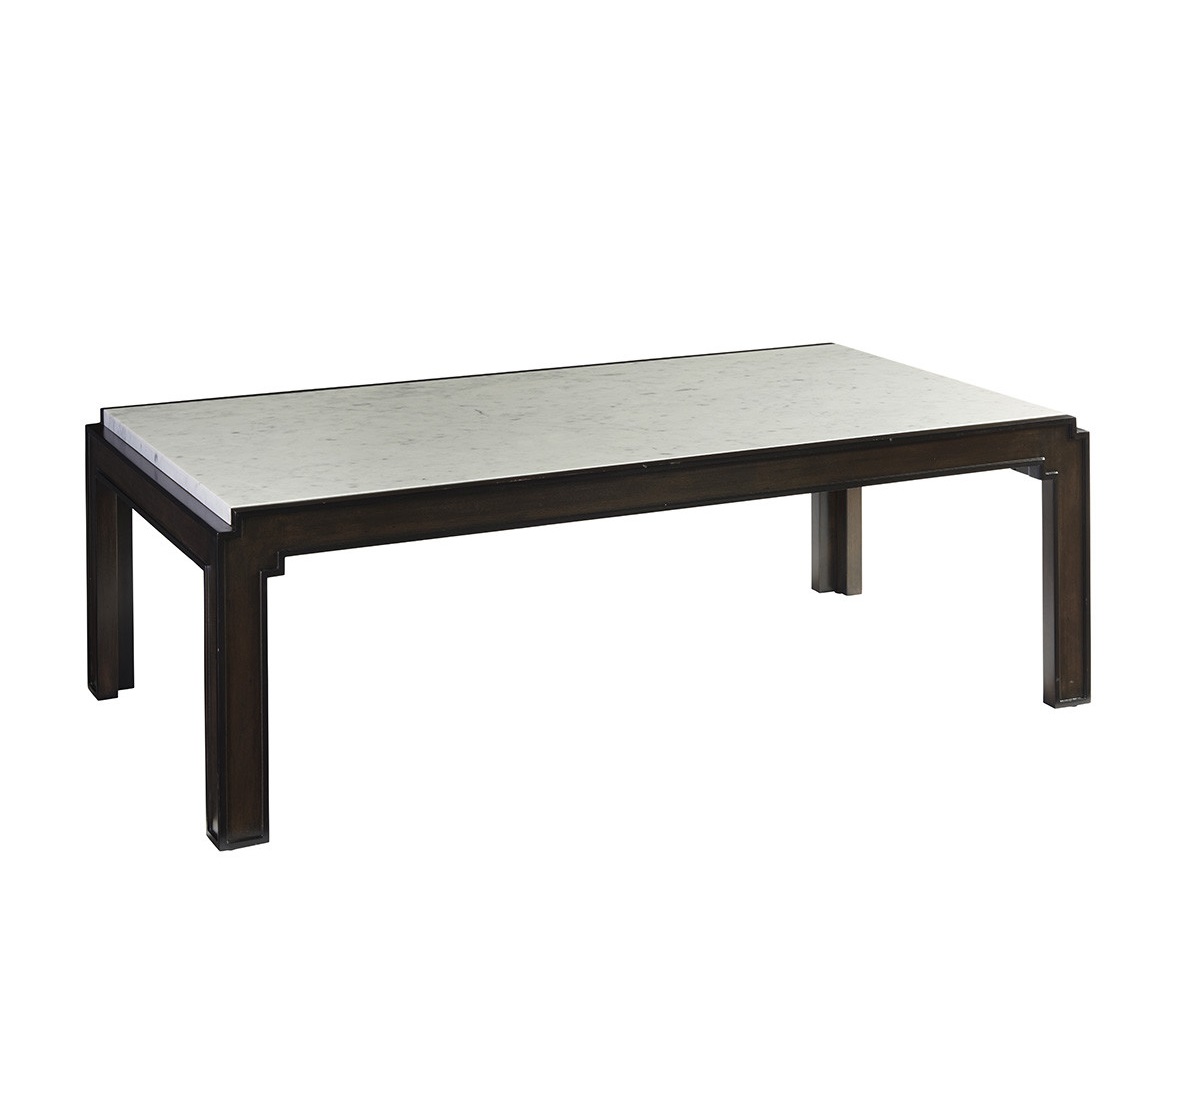 Doheny Rectangular Cocktail Table For Sale, Brooklyn, New York, Furniture By ABD